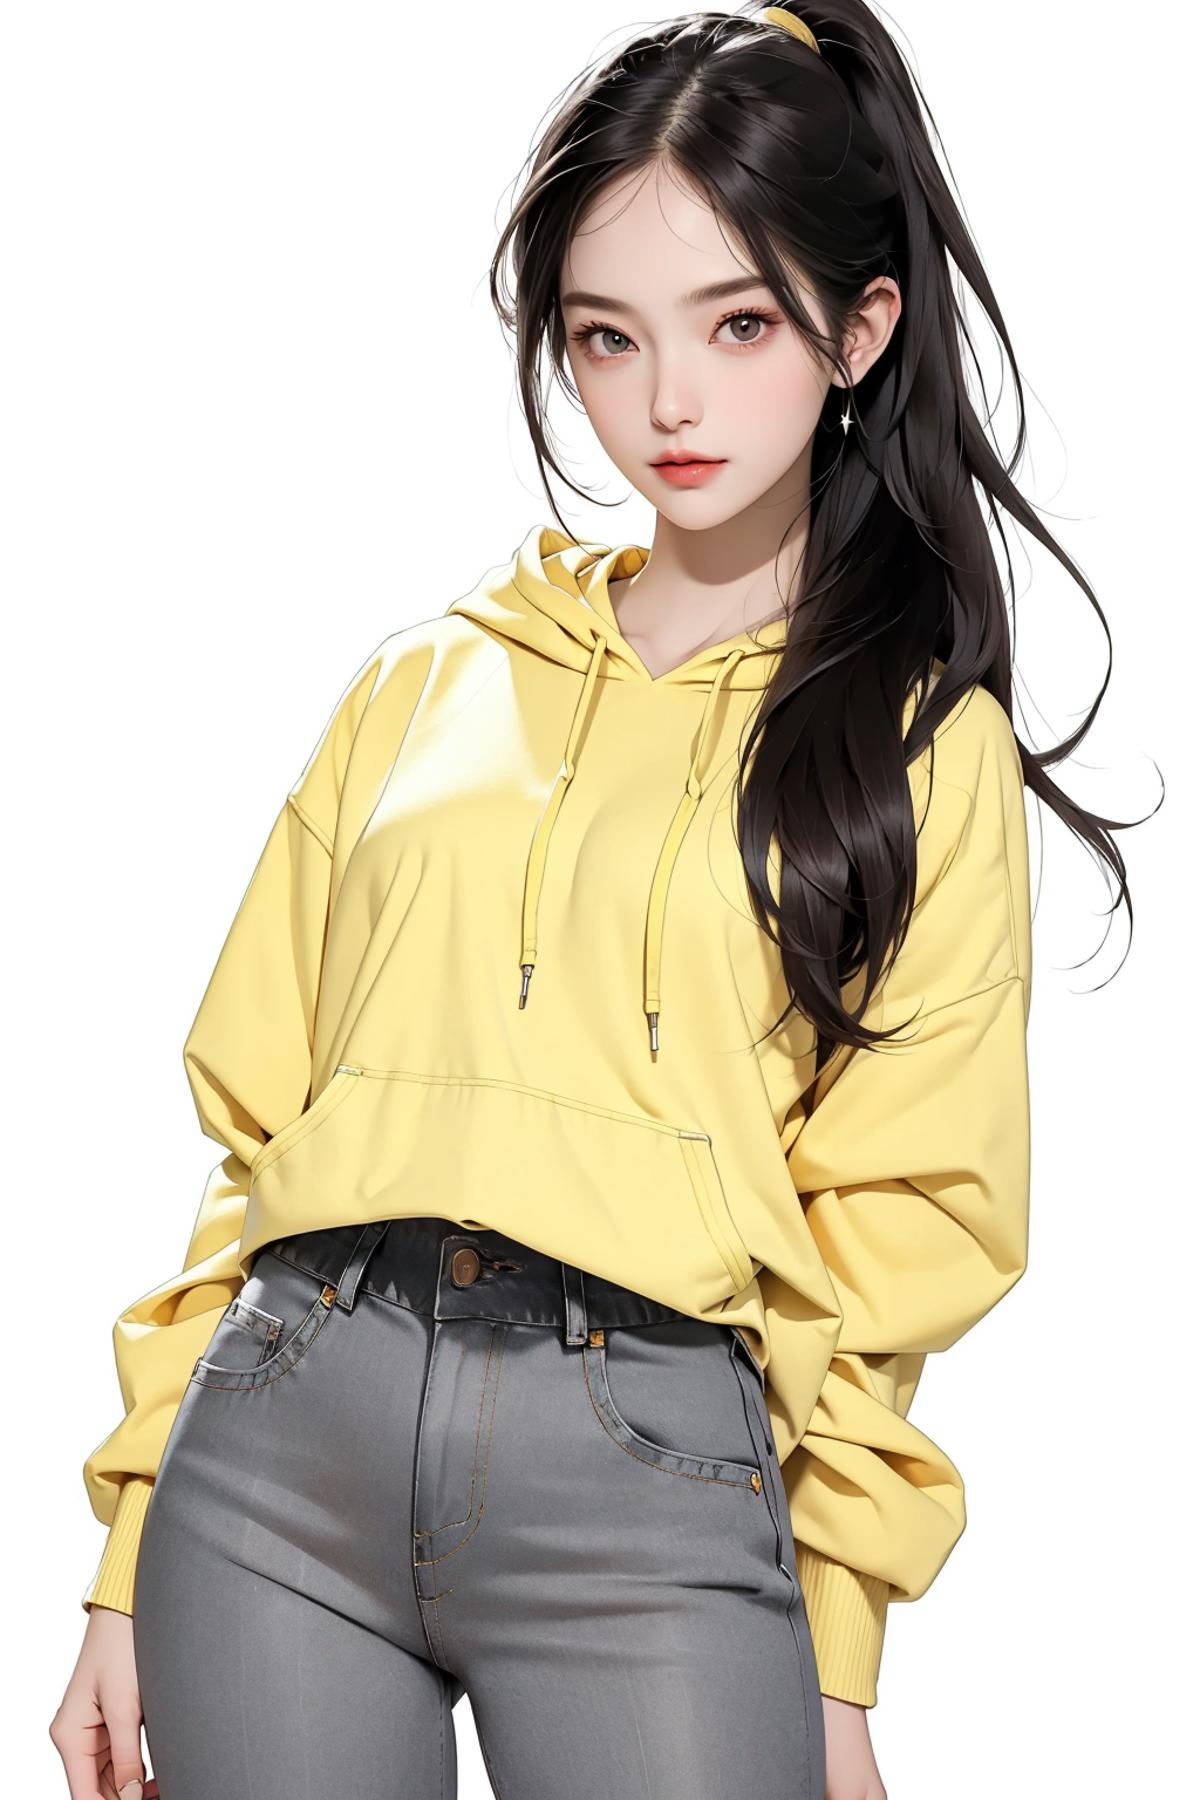 A young girl wearing a yellow hoodie and jeans.